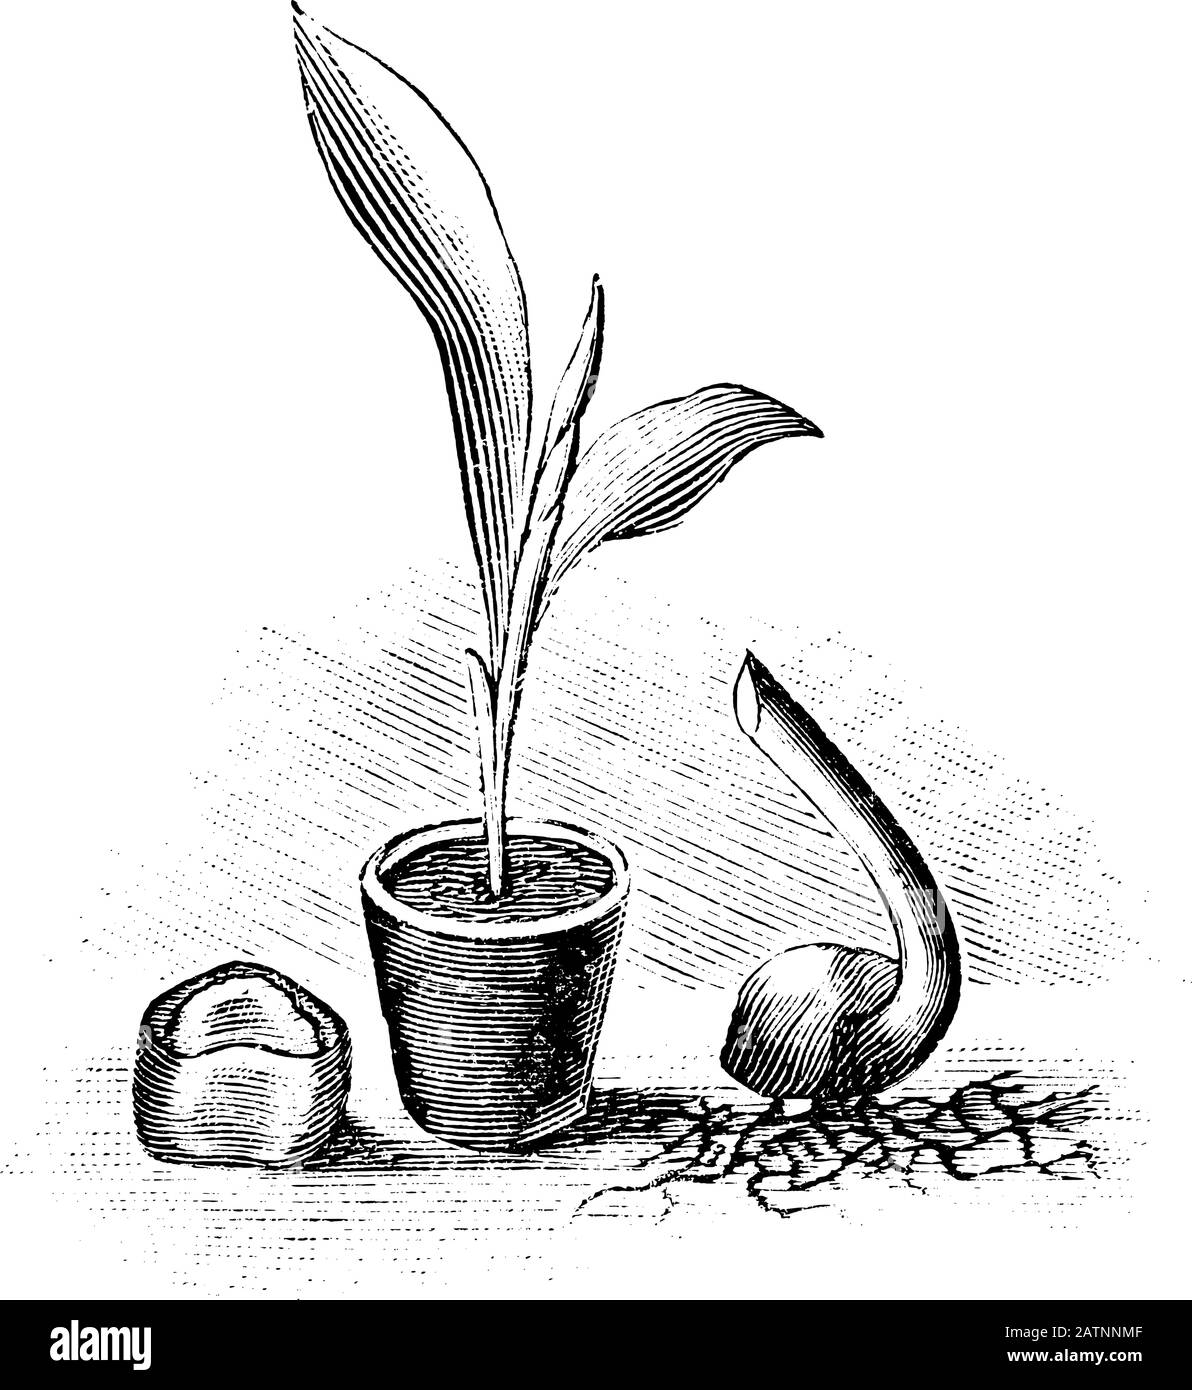 Antique vintage line art illustration, engraving or drawing of seed, seedling and sprouting seed of banana tree plant . From book Plants in Room, Prague, 1898. Stock Vector